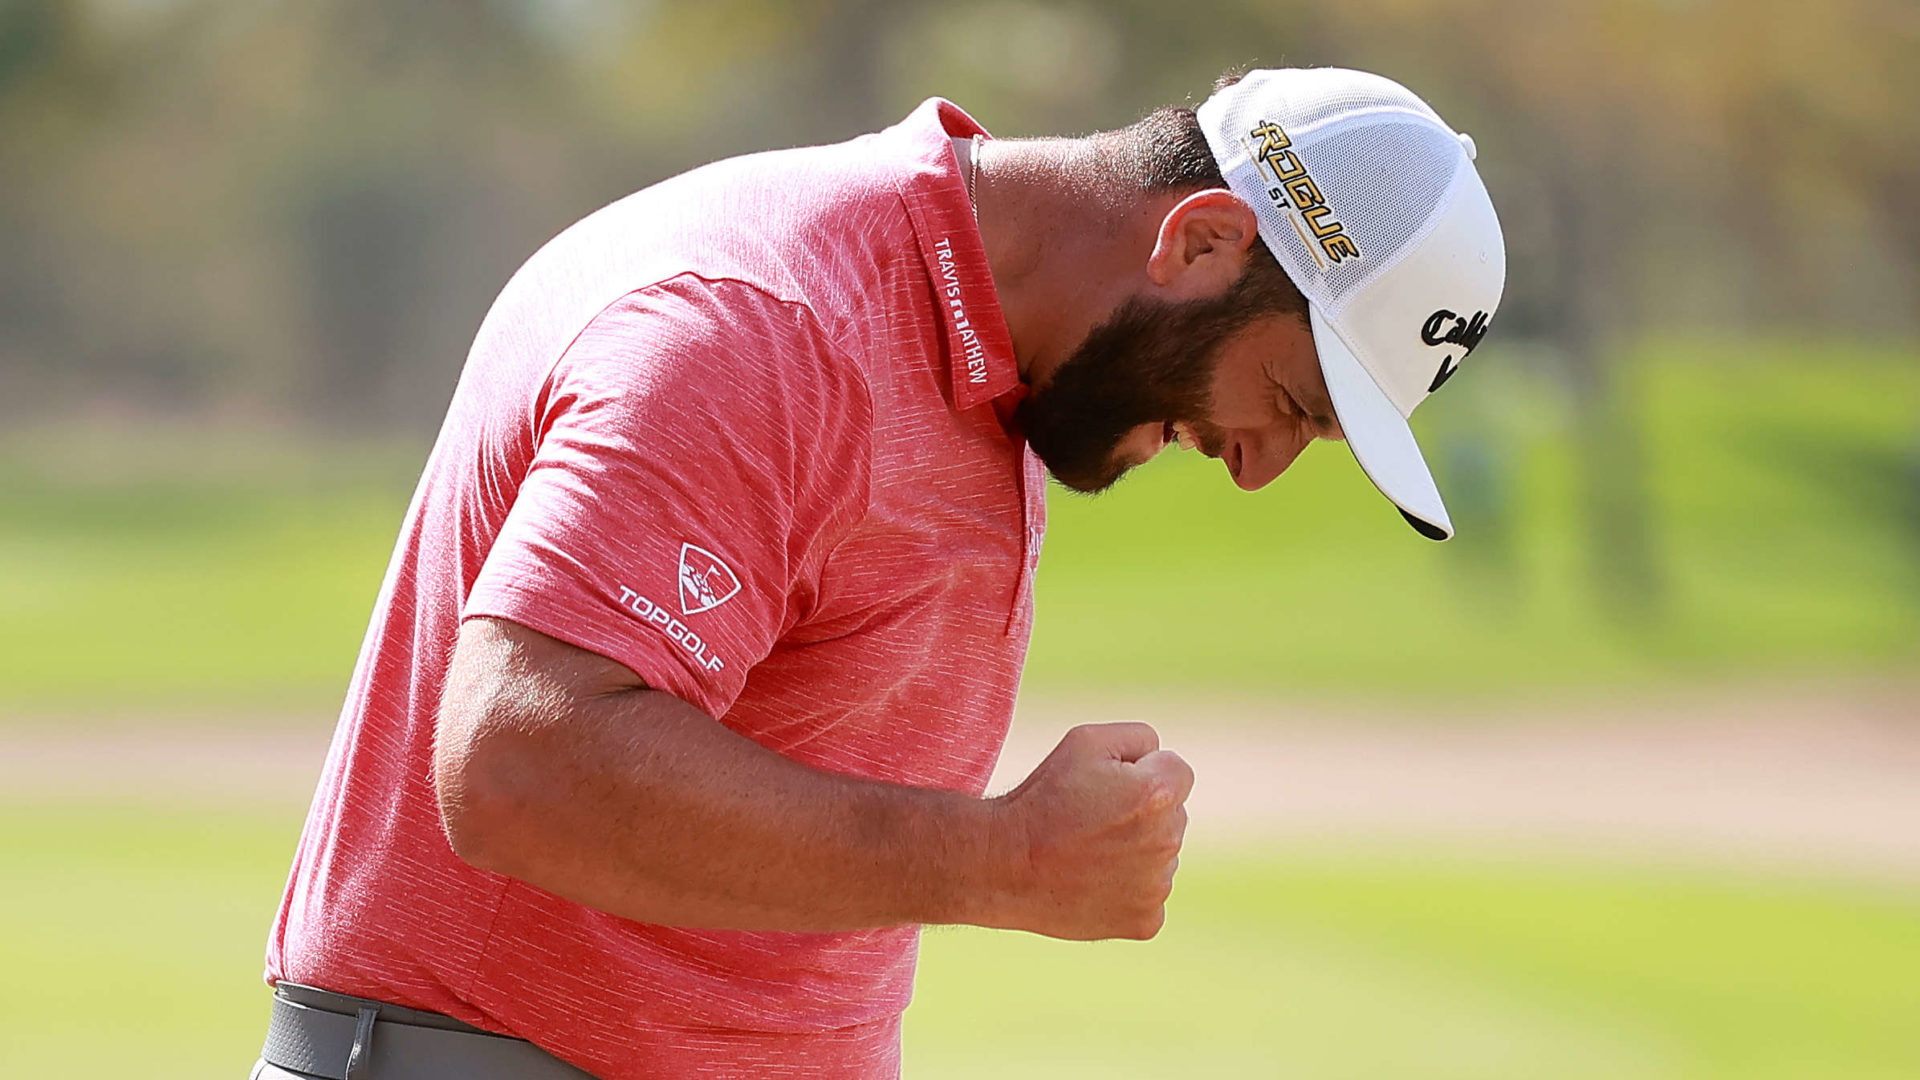 PUERTO VALLARTA, MEXICO - MAY 01: Jon Rahm of Spain celebrates after making a par in the 18th hole of the final round and winning the Mexico Open at Vidanta 2022 on May 01, 2022 in Puerto Vallarta, Jalisco. tour news (Photo by Hector Vivas/Getty Images)